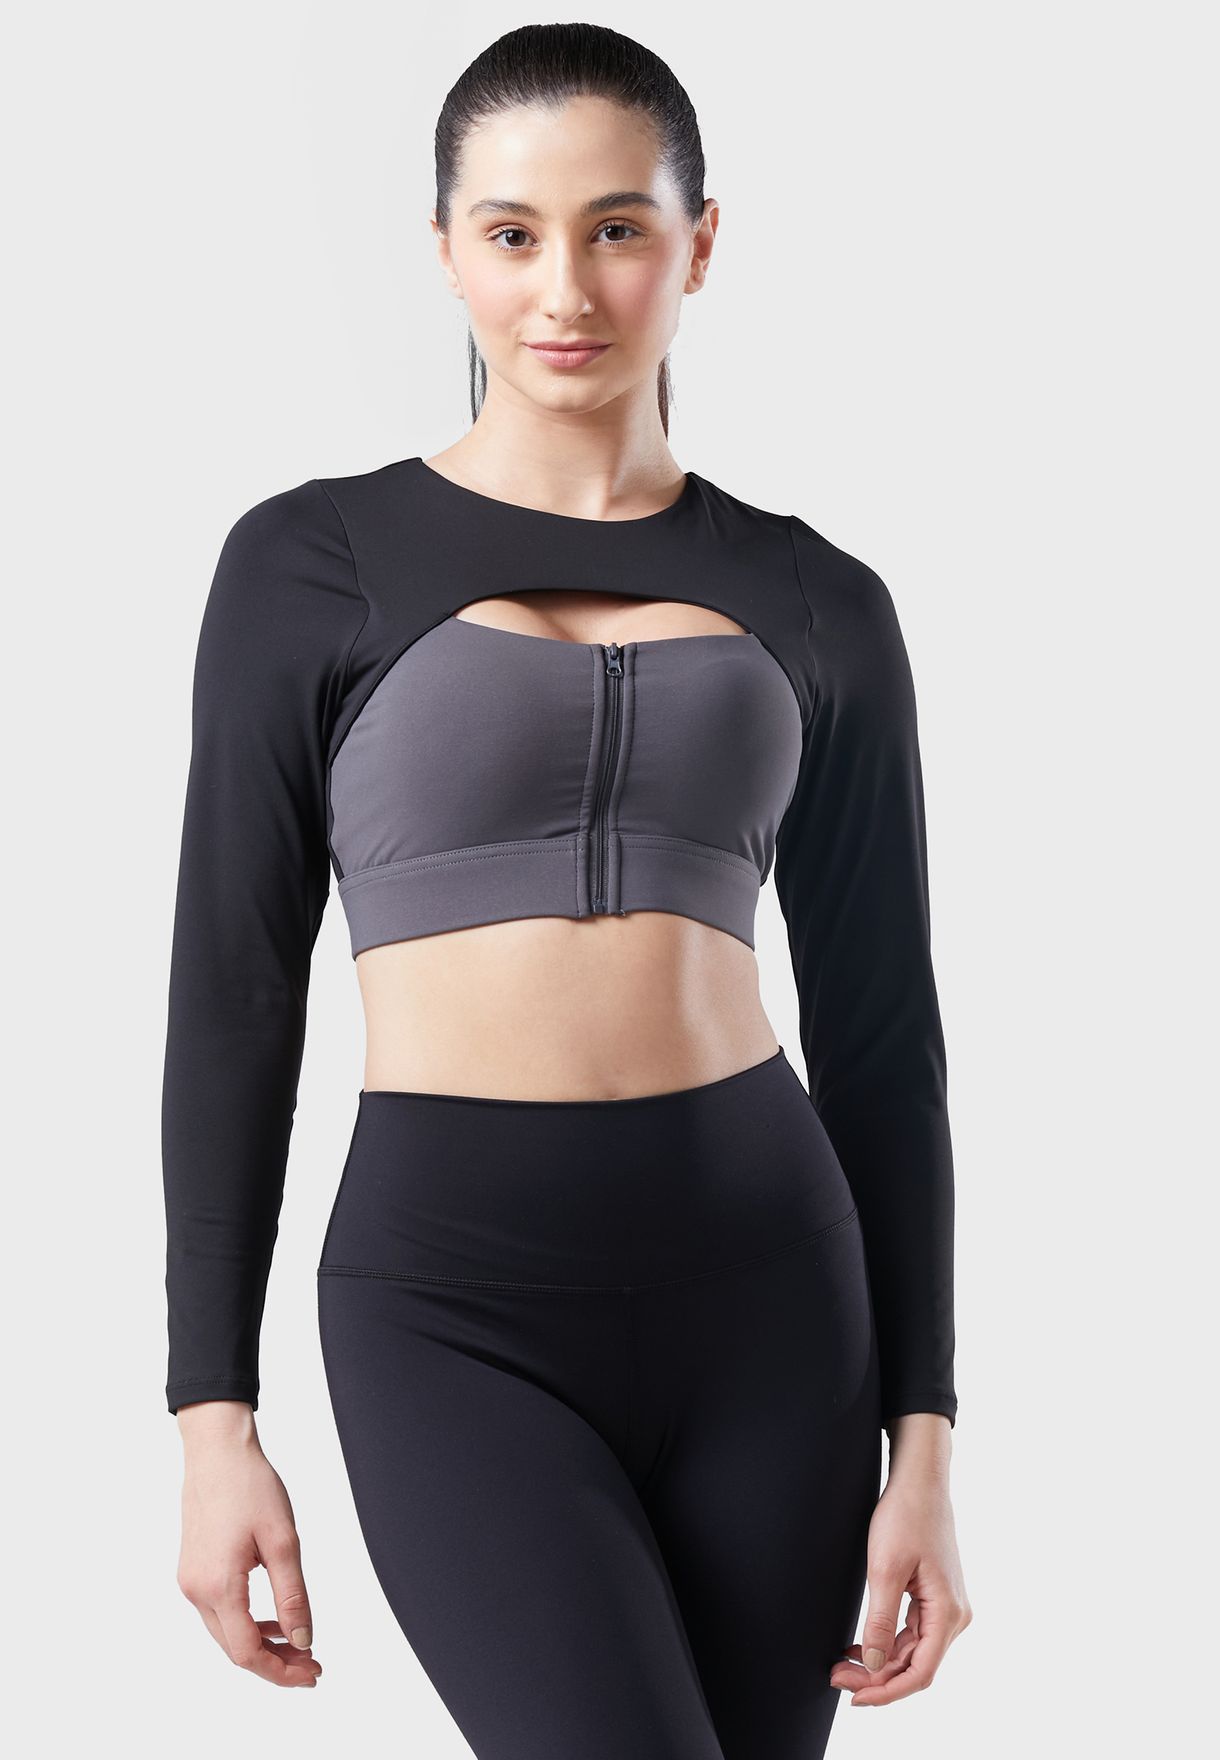 Cut Out Athletic Bra